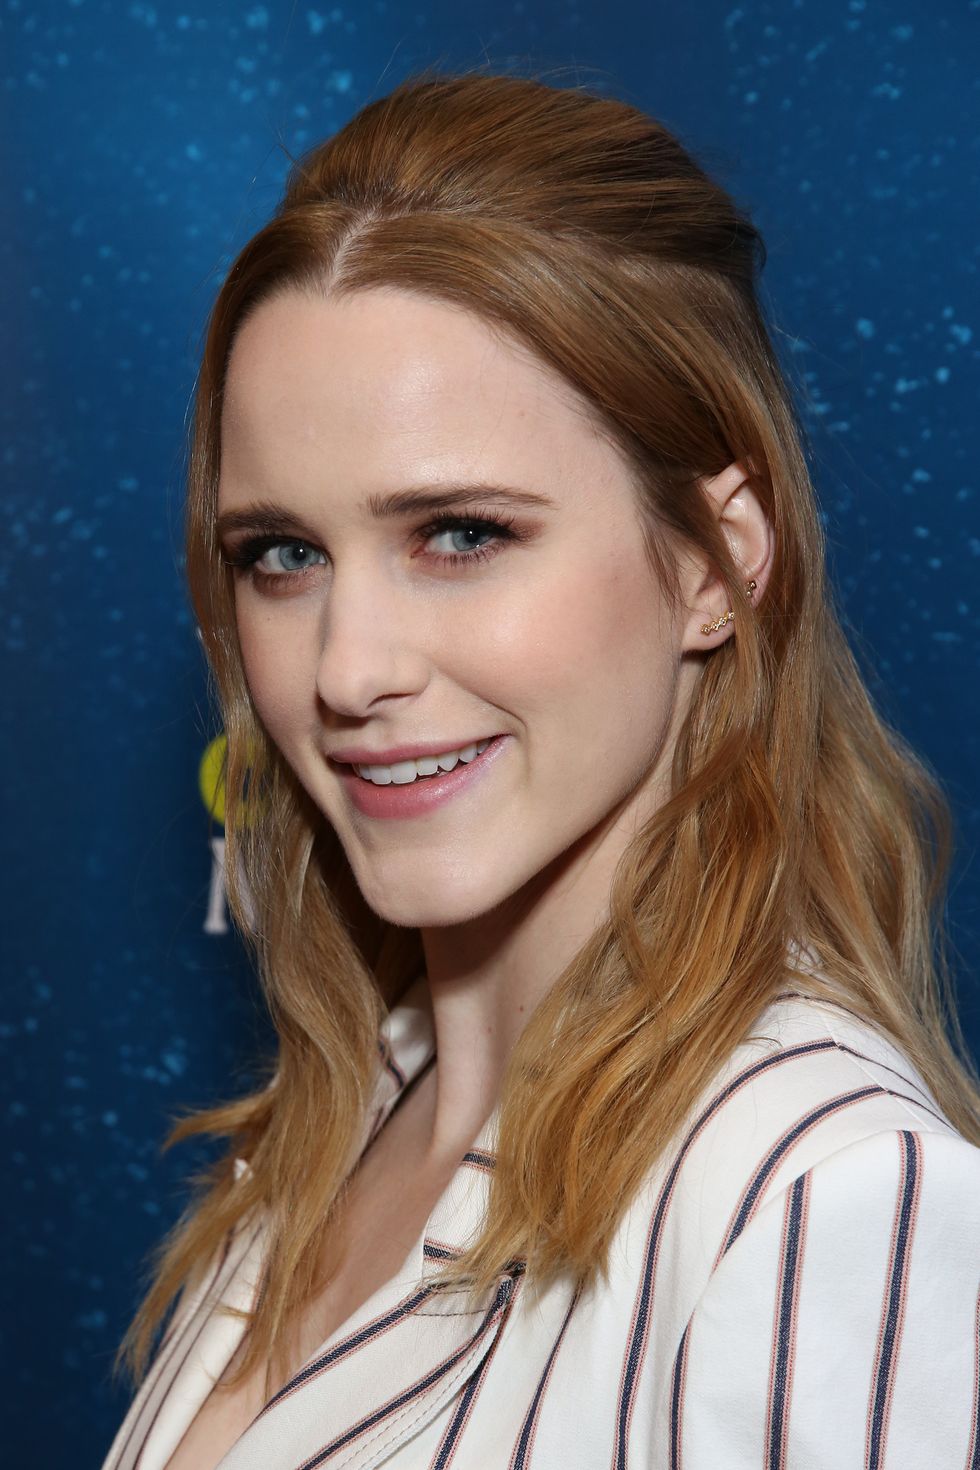 Rachel Brosnahan - Beautiful Hairstyles for Every Age